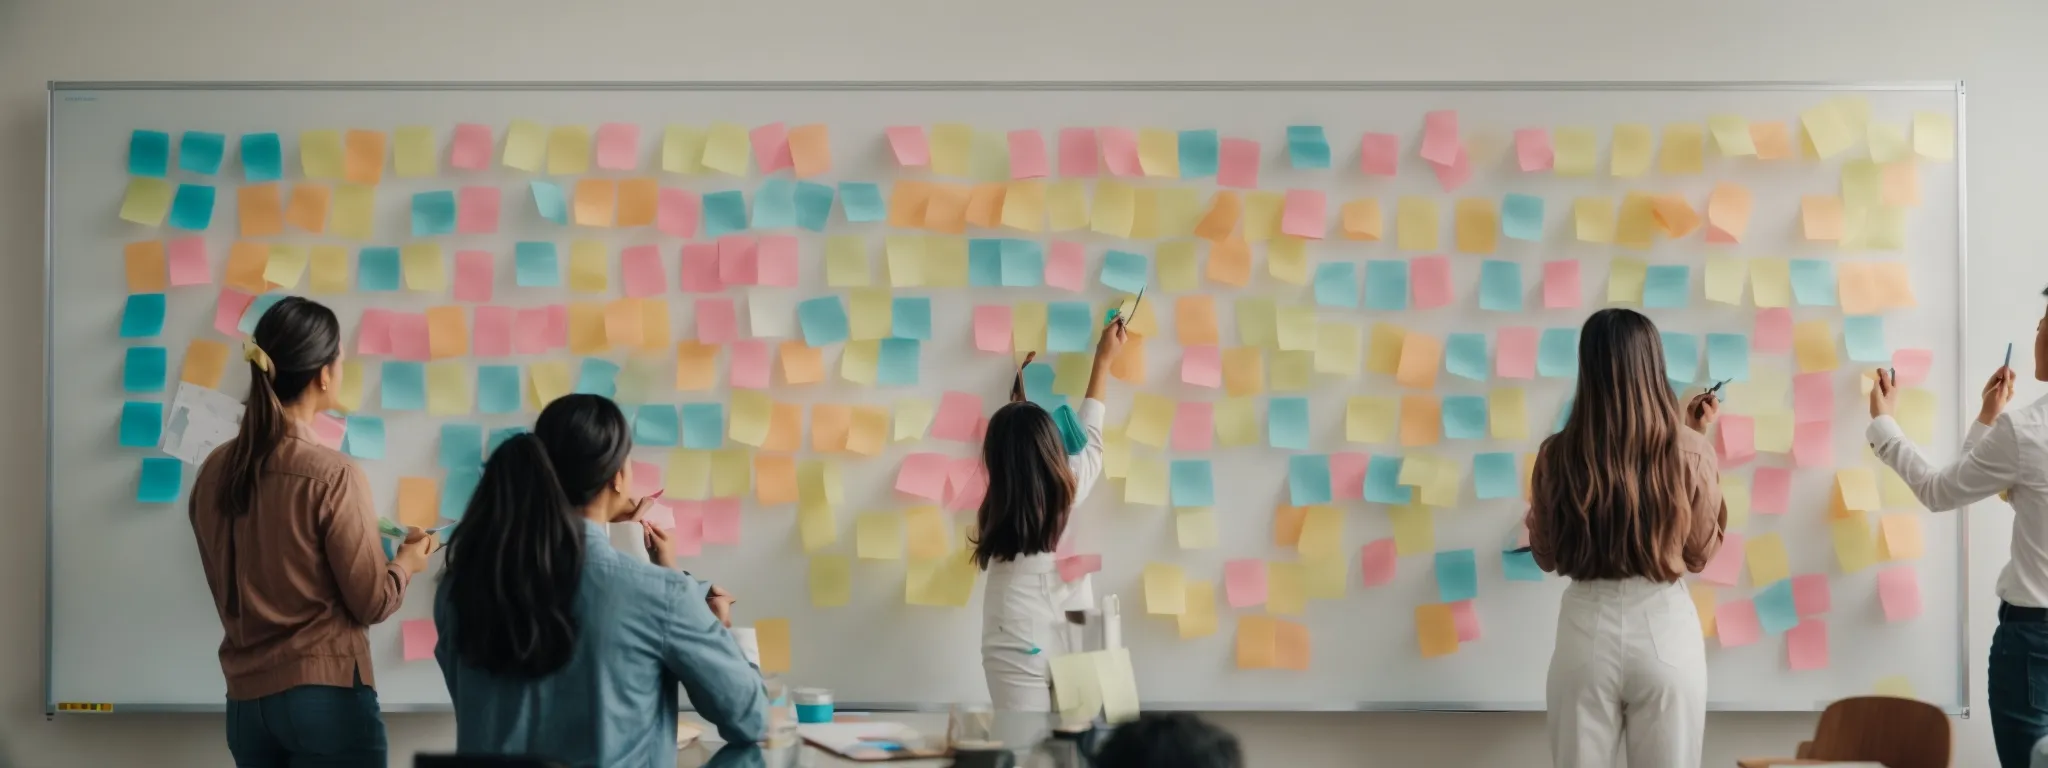 a diverse group of professionals collaboratively points at colorful sticky notes on a large whiteboard, symbolizing an agile board in action.